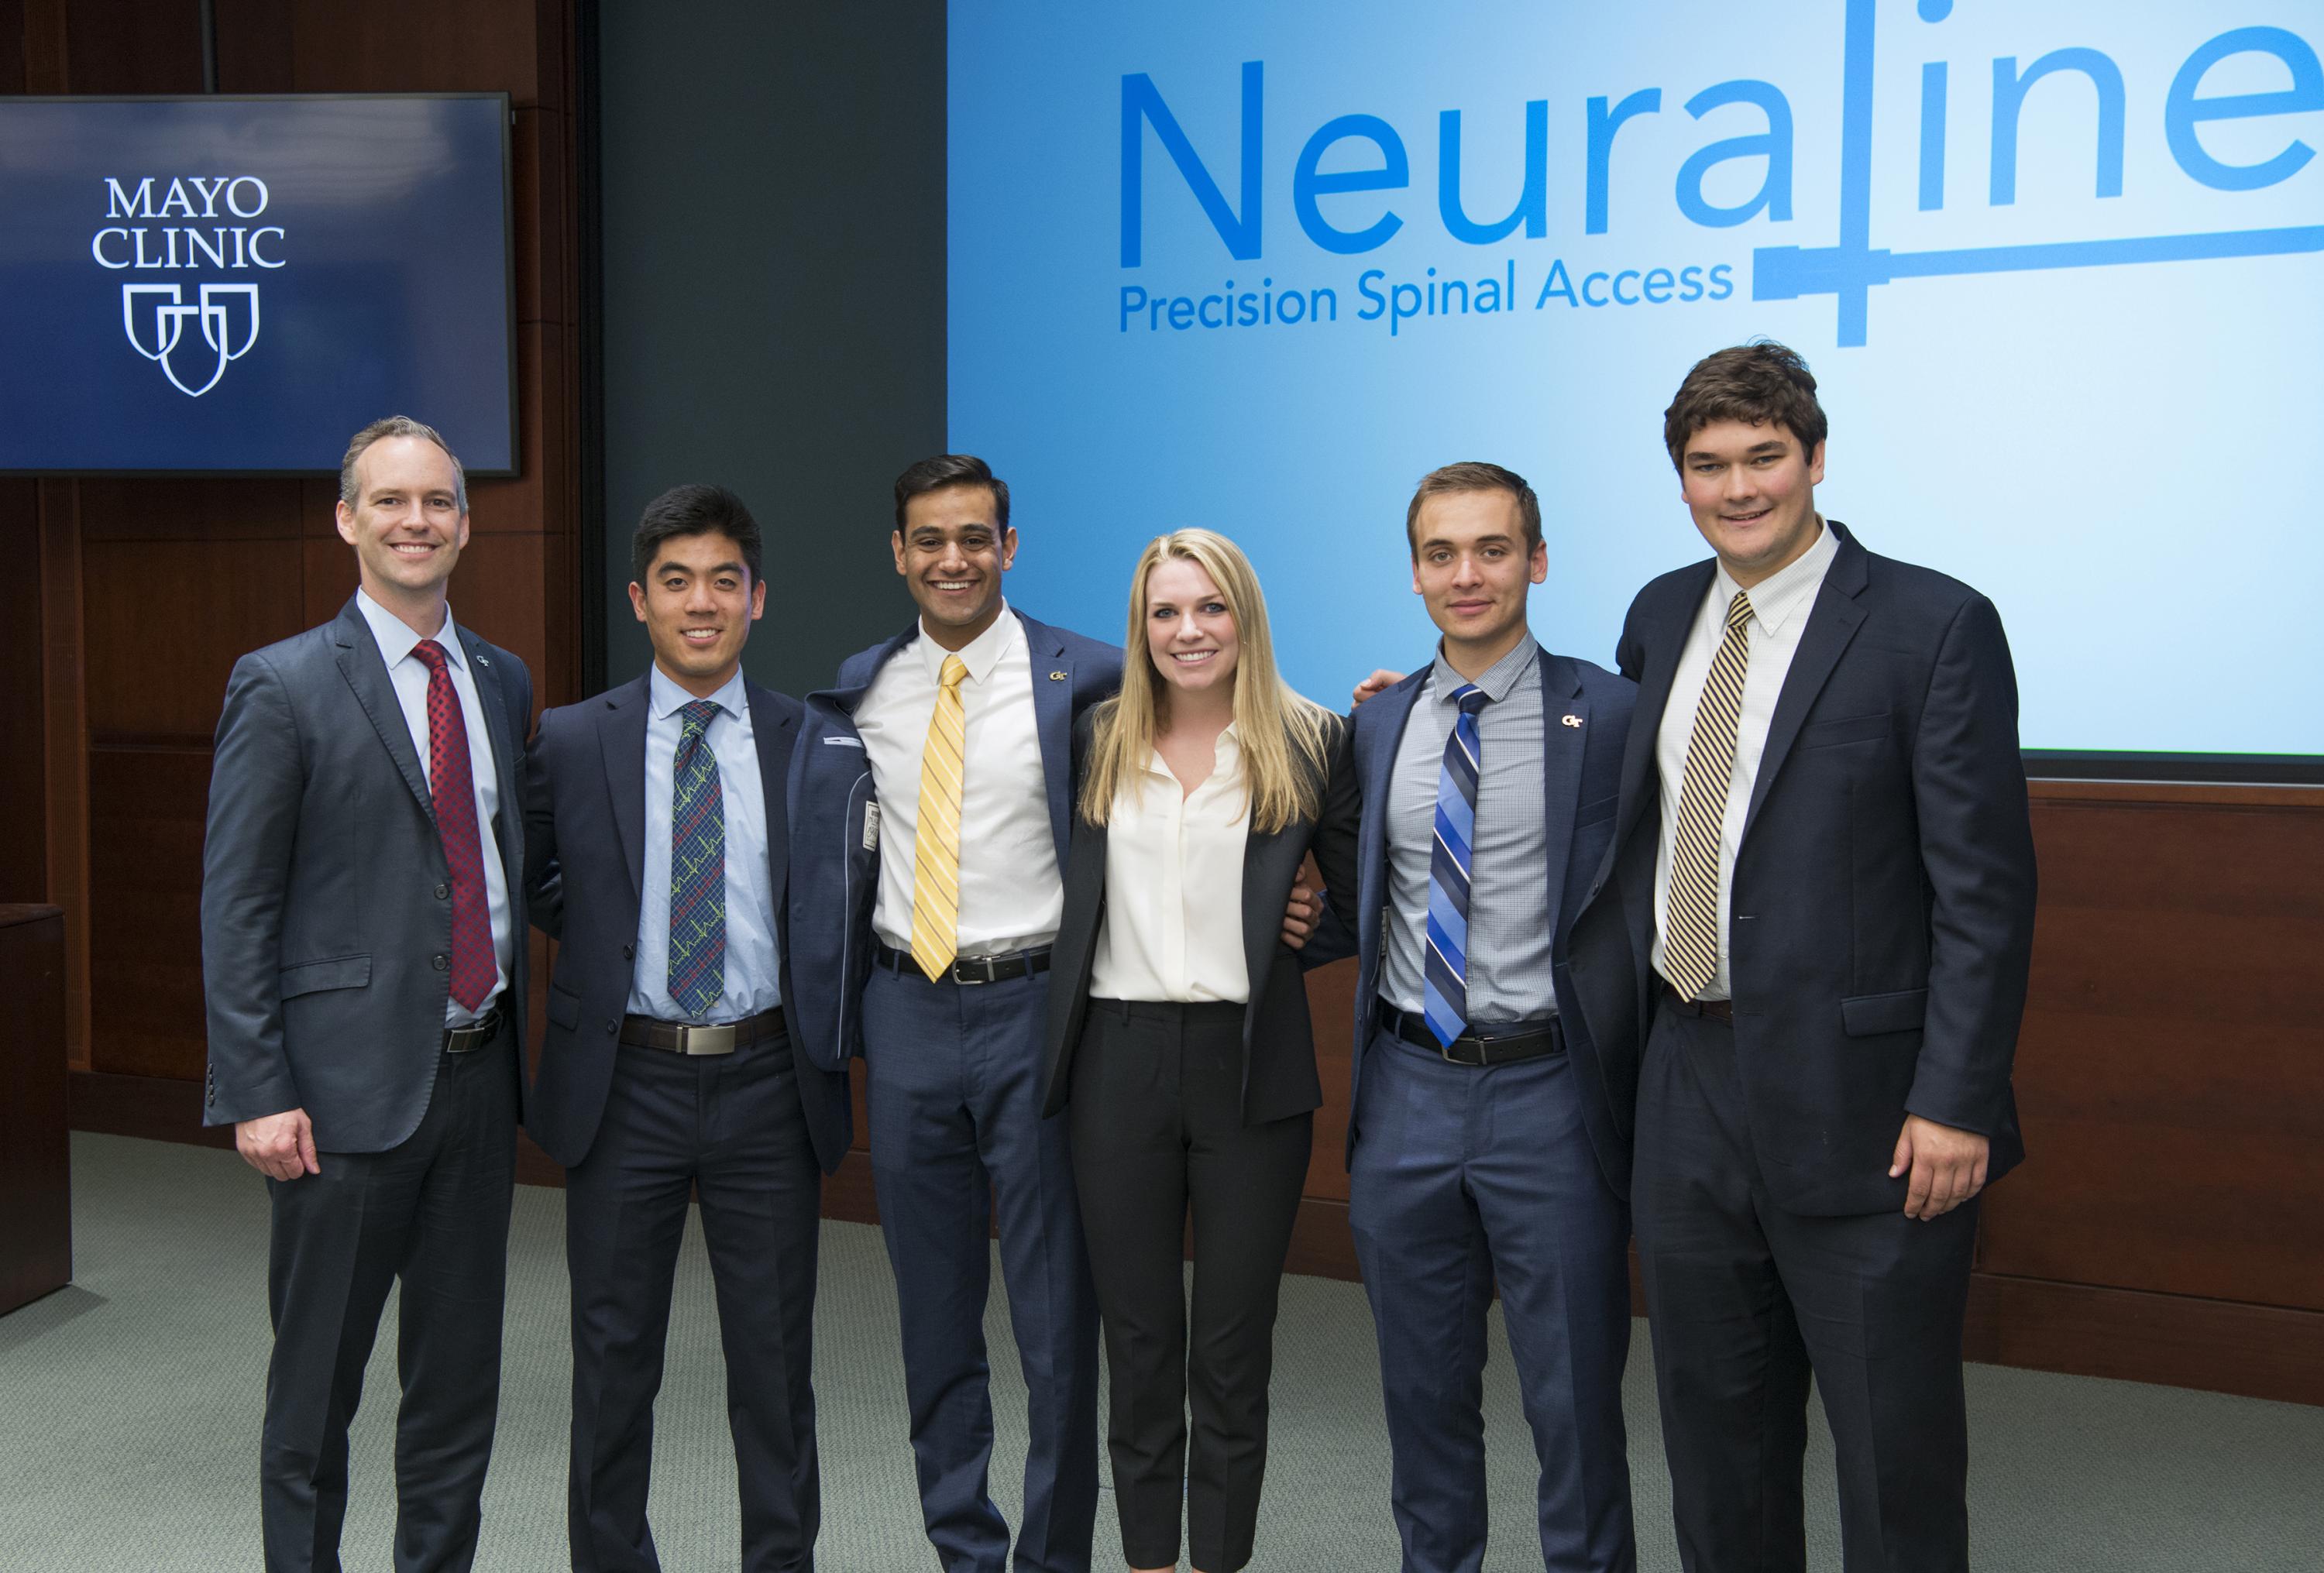 Team Neuraline and Dr. Rains: Pictured are (left to right), Professor of the Practice James Rains, and Capstone students Cassidy Wang, Dev Mandavia, Marci Medford, Lucas Muller, and Alex Bills. They visited the Mayo Clinic in Jacksonville, Florida, to make their Capstone presentation.